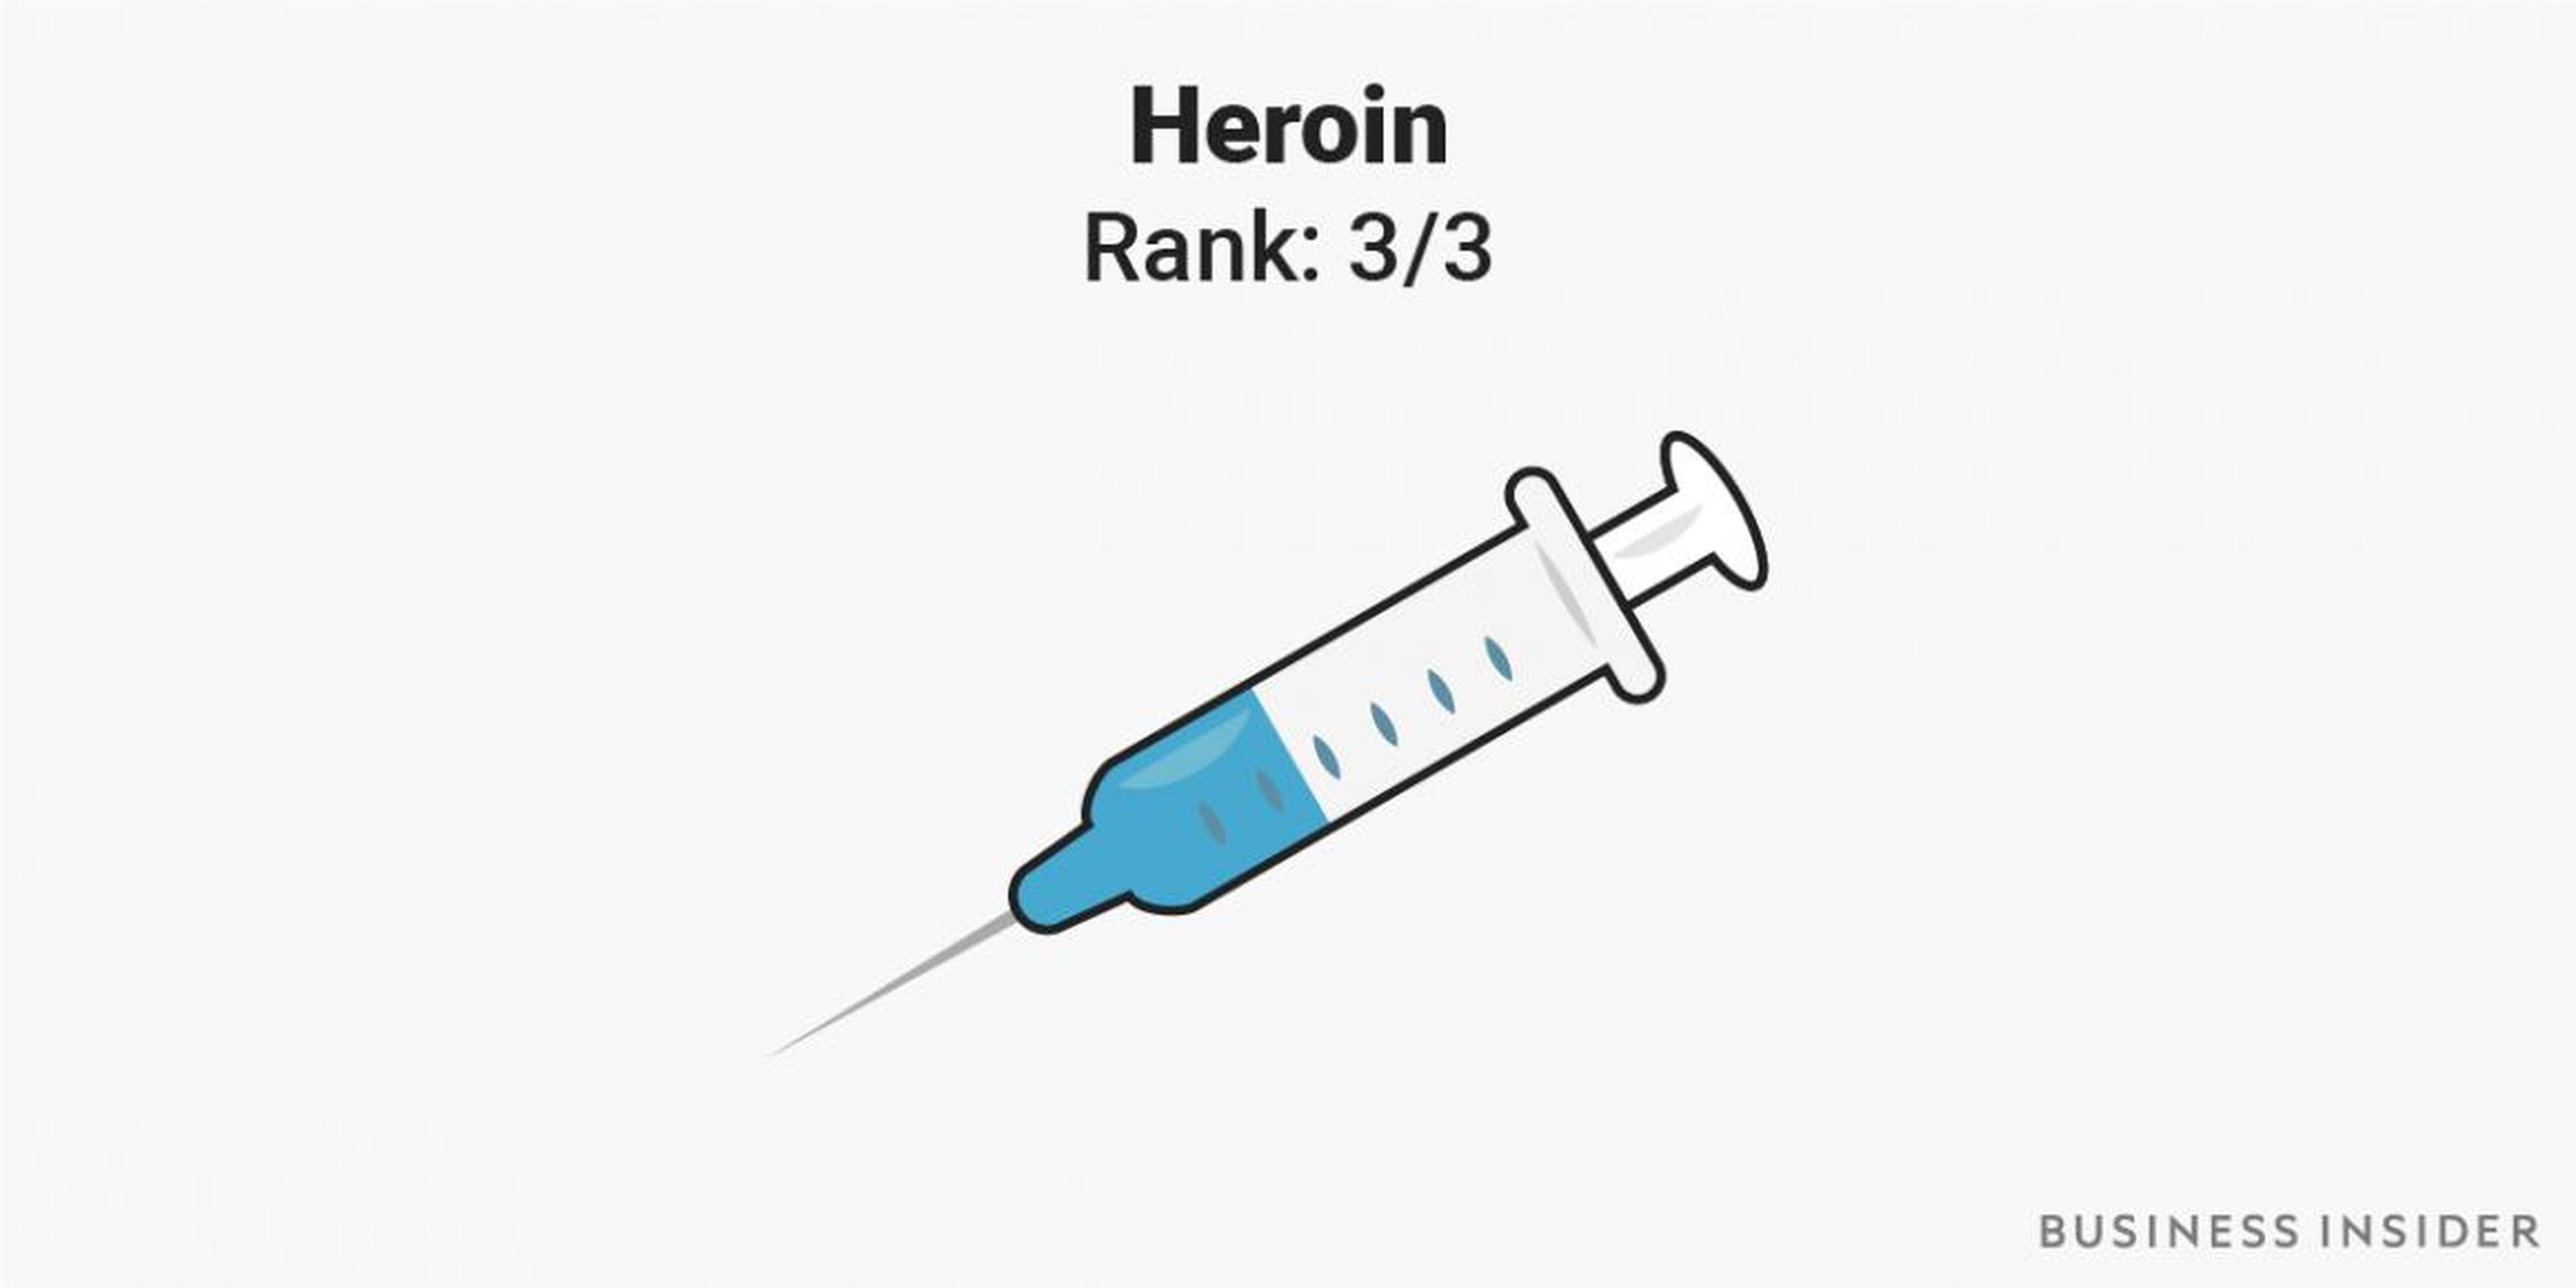 1. Heroin ranked the highest on the list in terms of dependency.